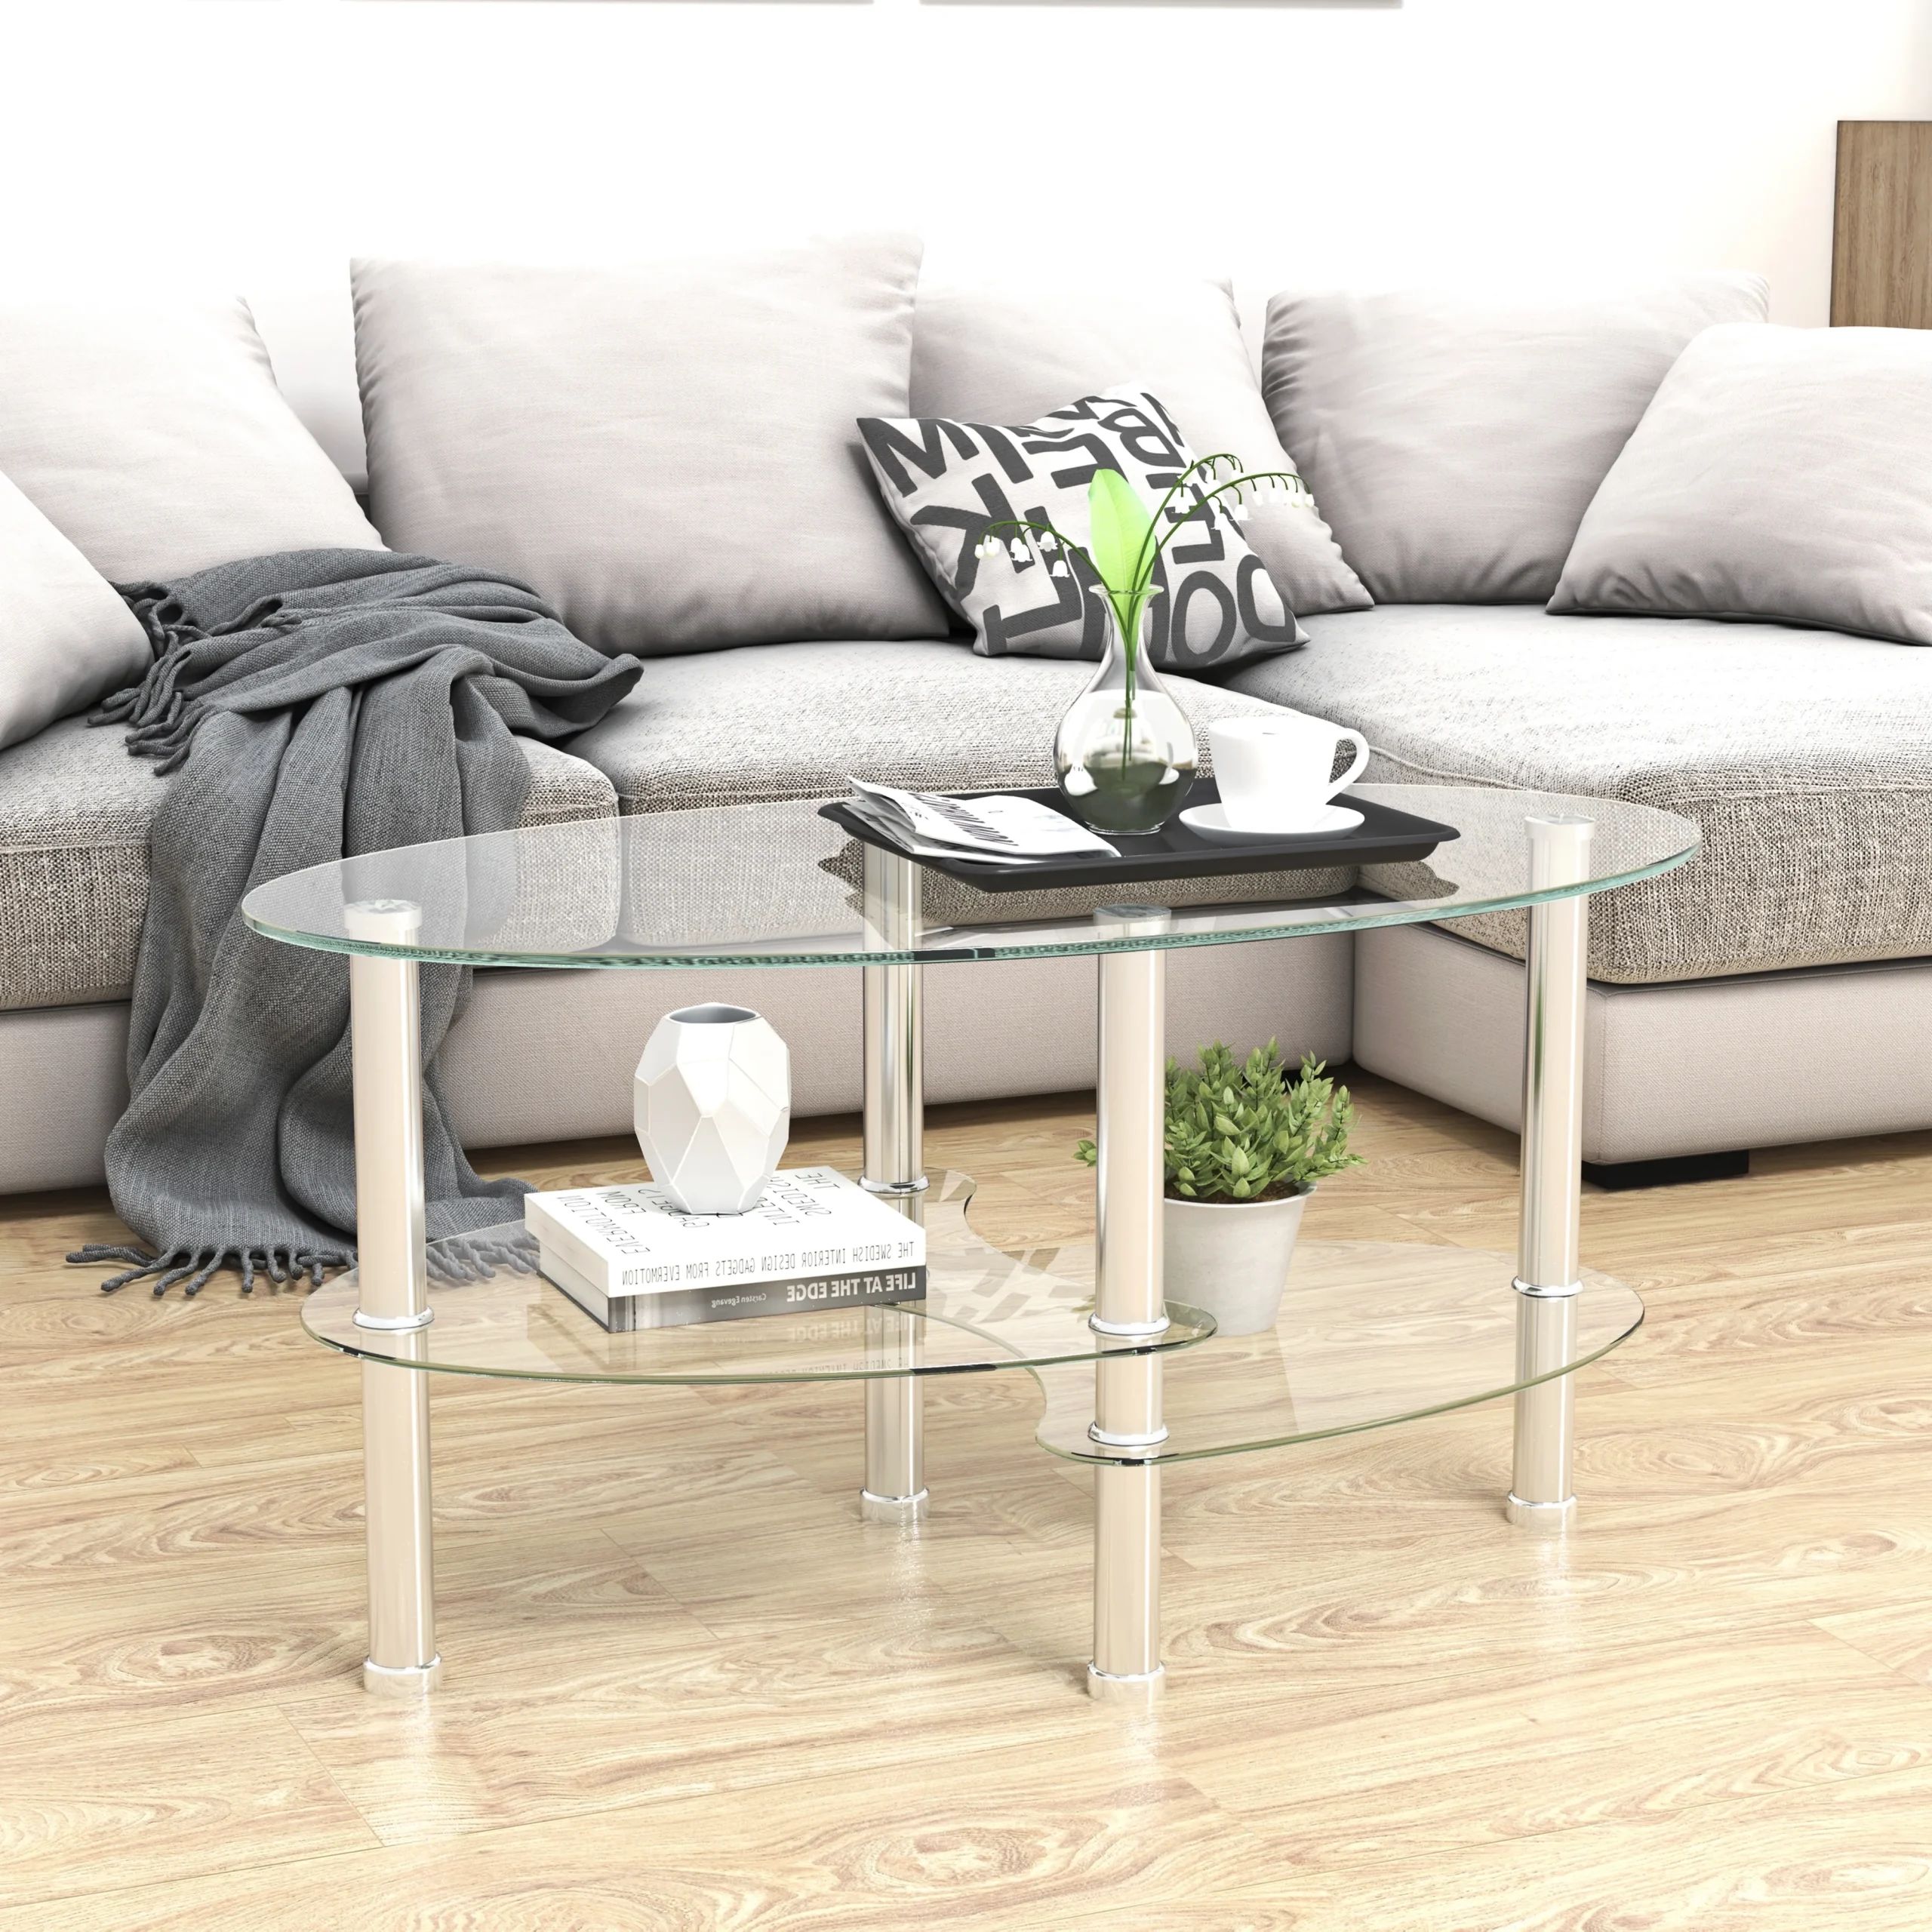 Tempered Glass Oval Side Tables With Popular Yardi Yard Mid Century Modern Oval 2 Tier Tempered Glass Coffee Table With  Storage Side Shelf And Metal Legs For Living Room Clear – Walmart (View 9 of 10)